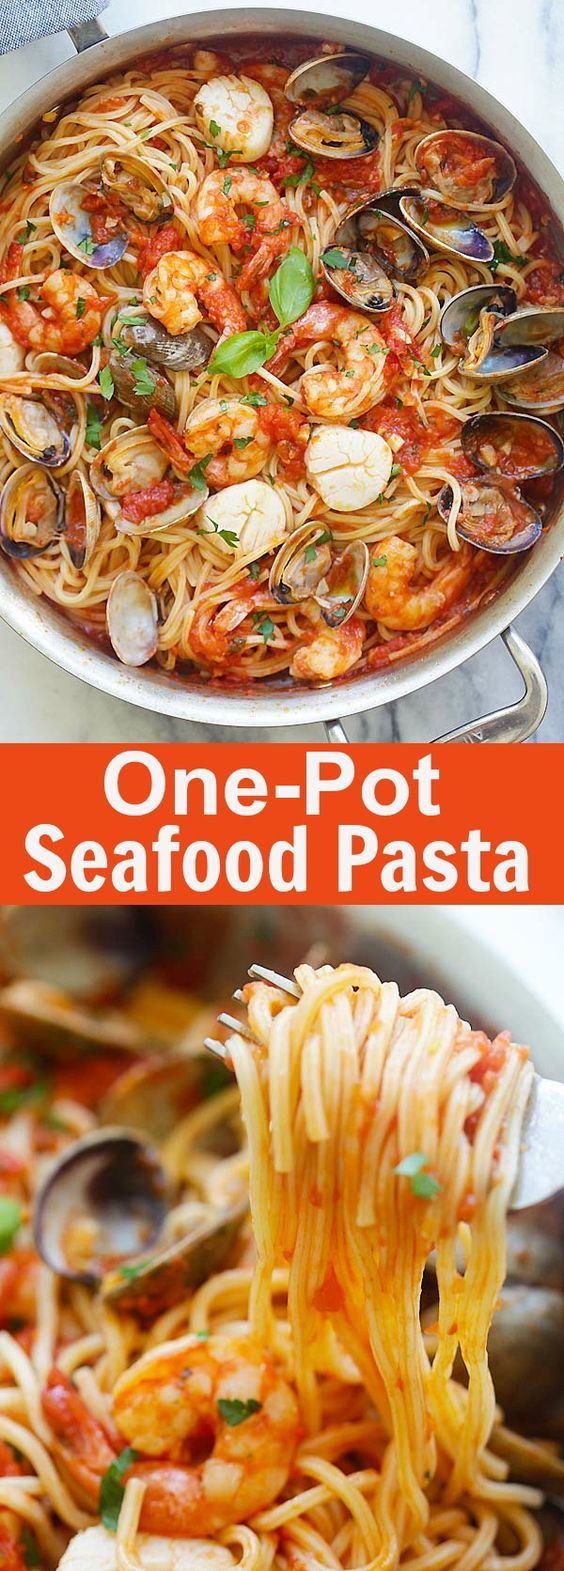 The 40 Best Seafood Recipes You'll Ever Need